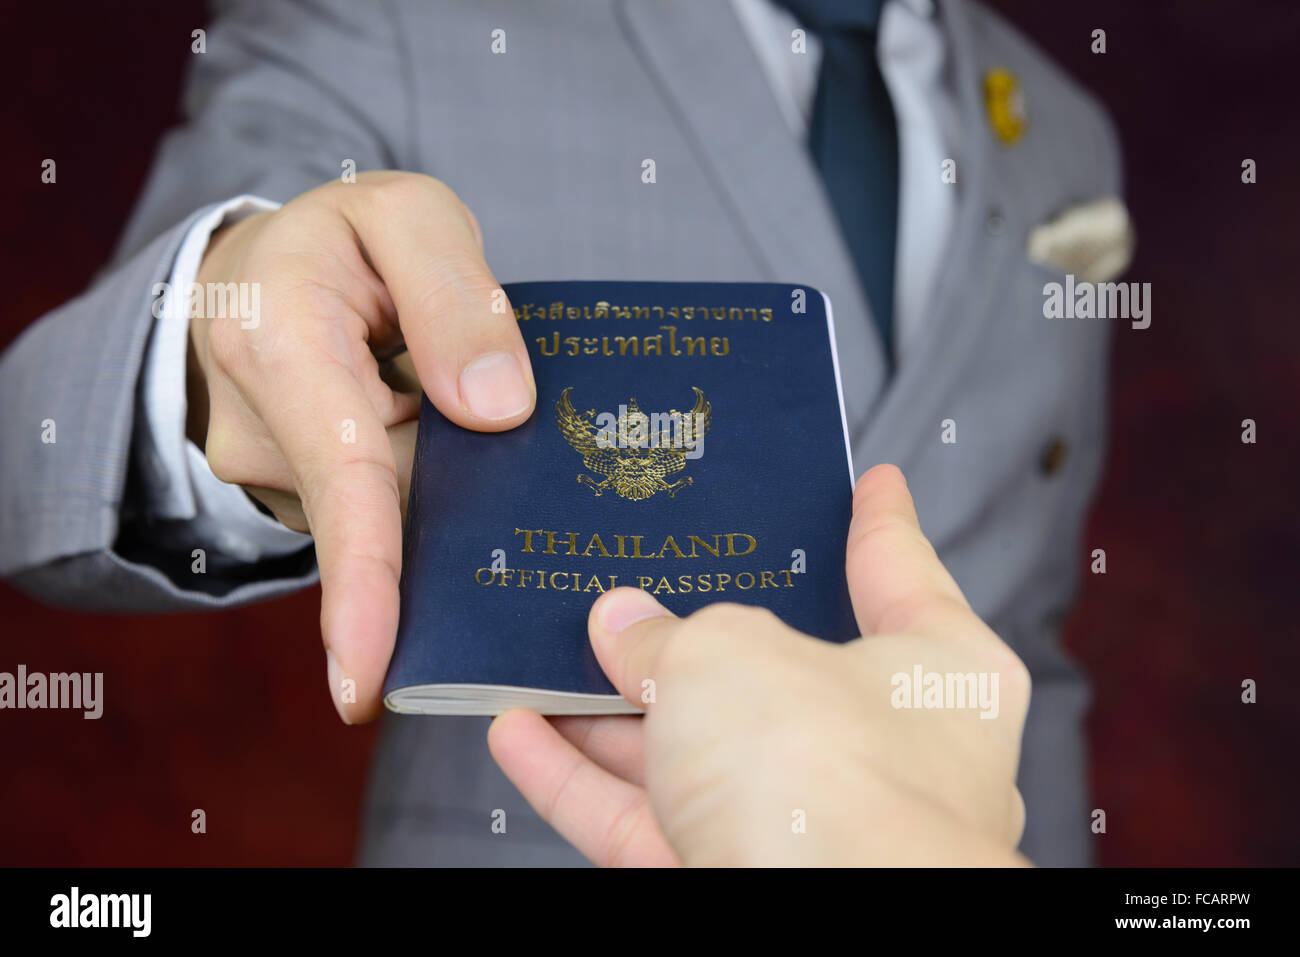 businessman in grey suit showing official passport to travel aboard, business trip Stock Photo